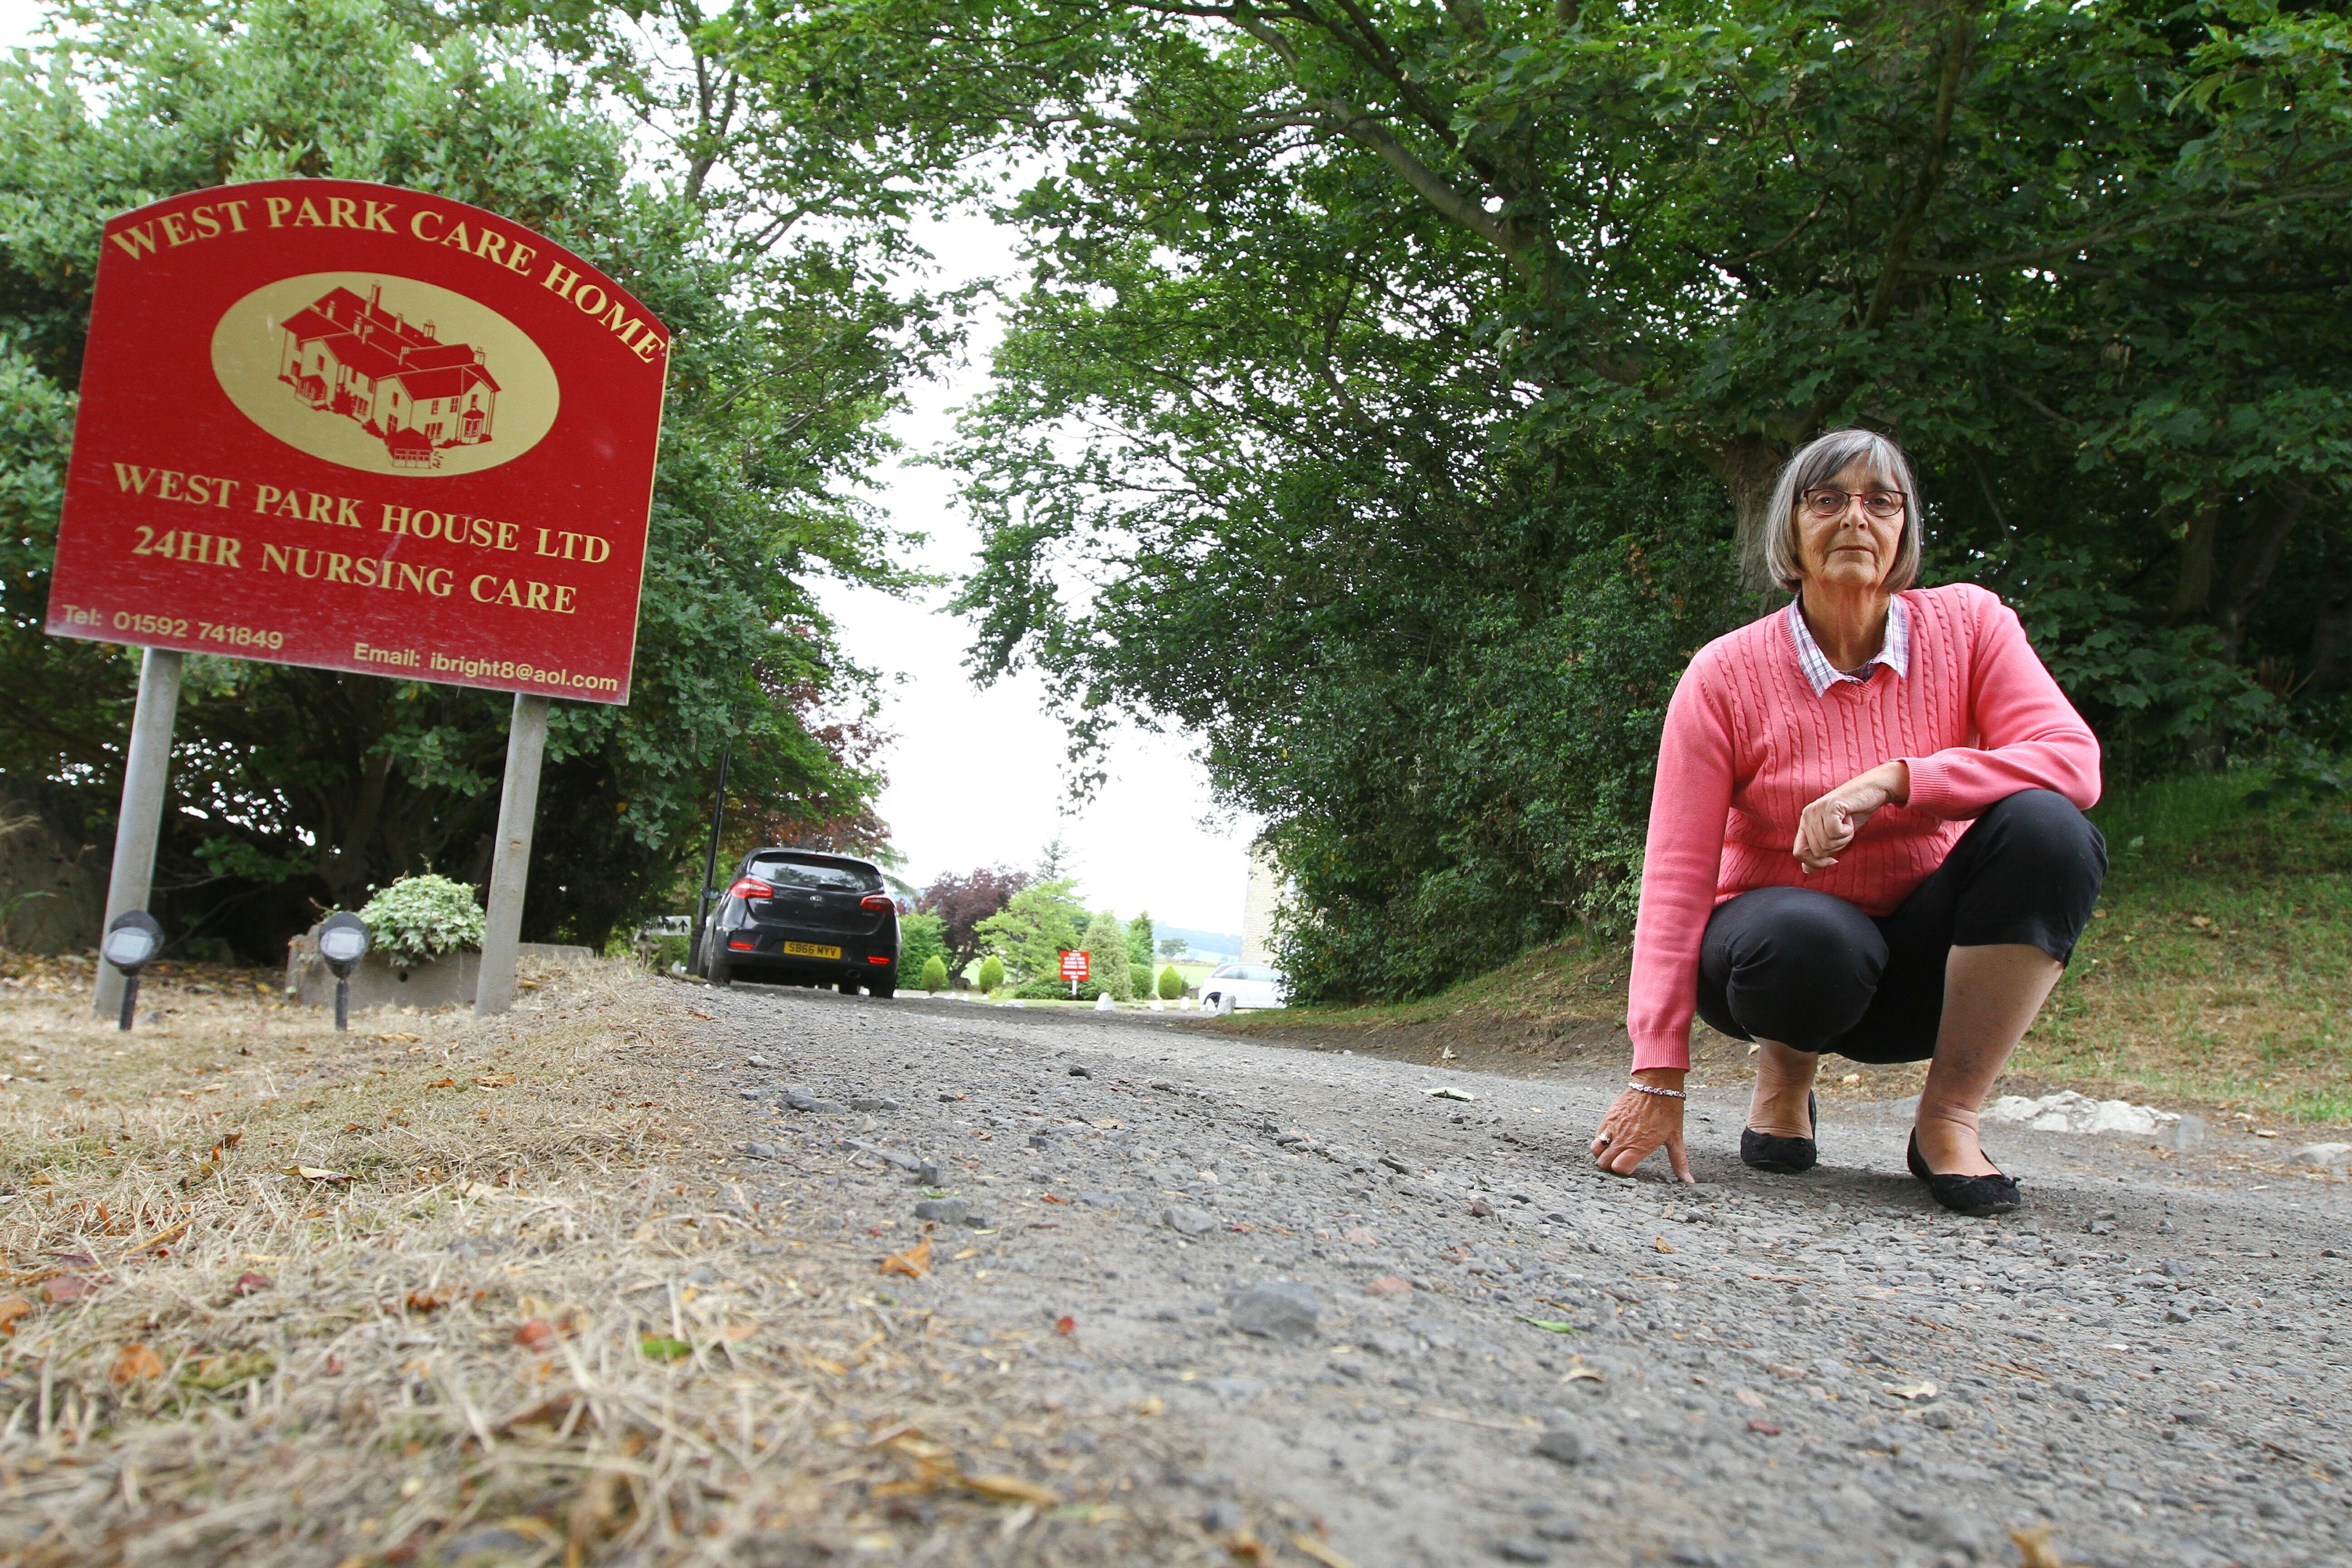 Courier Fife news-job CR0002411- Esther McLaren pictured on the road up to West Park Care Home in Leslie Fife which is badly potholed, and hervfather George has had to reduce his visits to see  wife margaret because of the state of the road.friday 13th July.